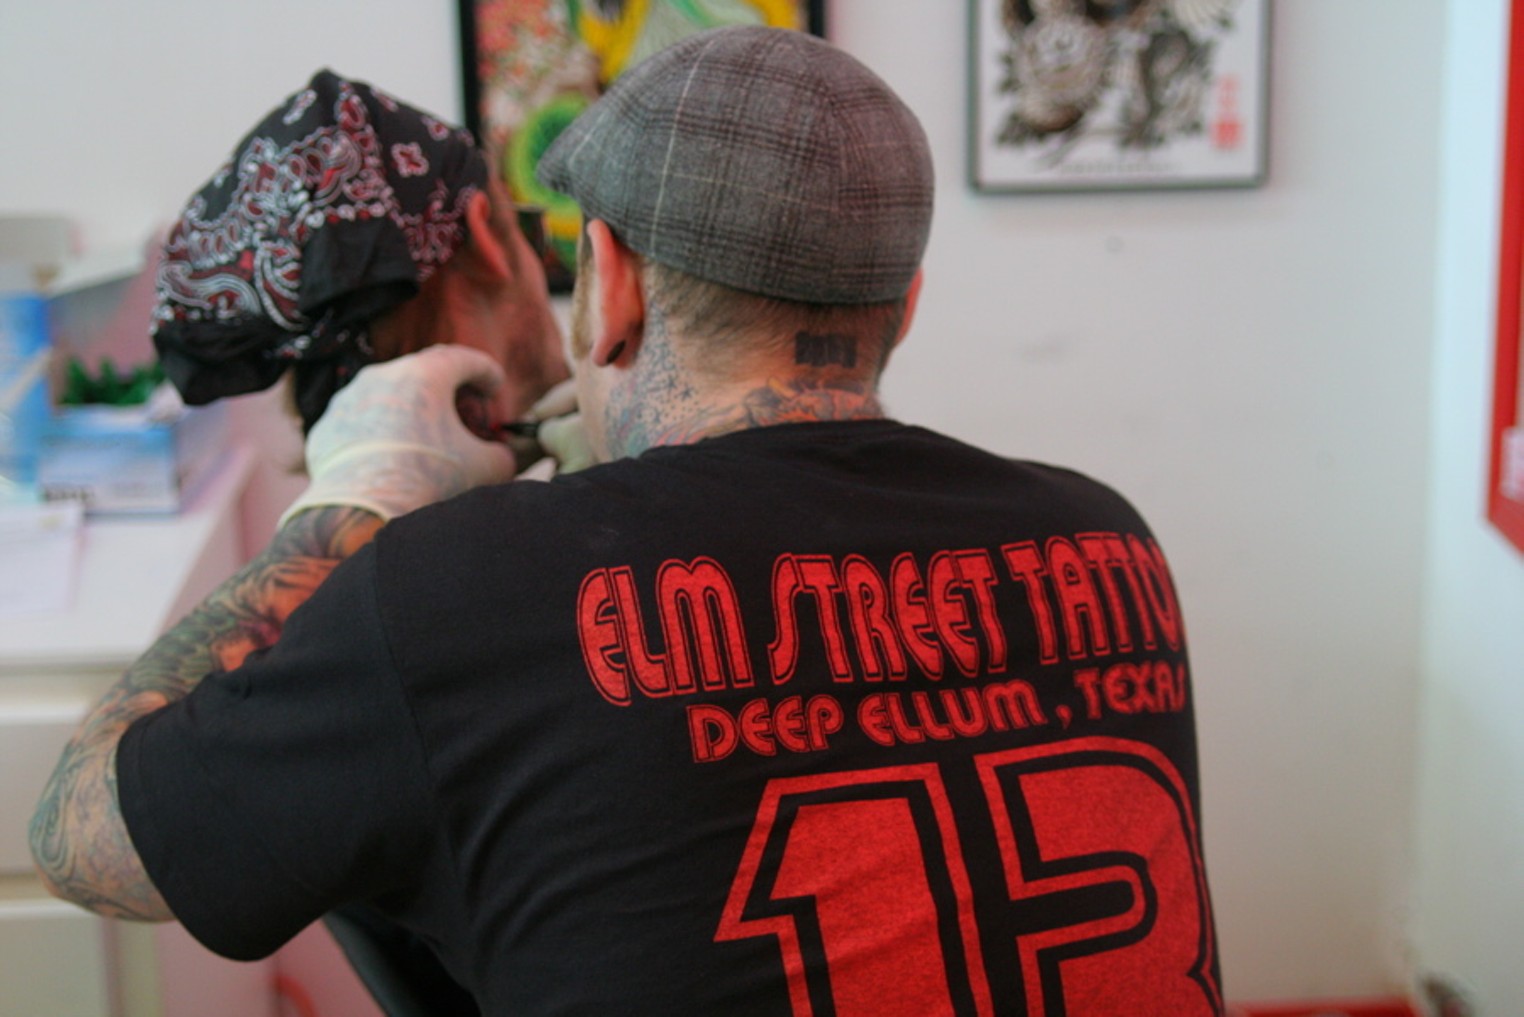 Elm Street Tattoo Keeps Up Traditions In Spite Of Loss  Central Track